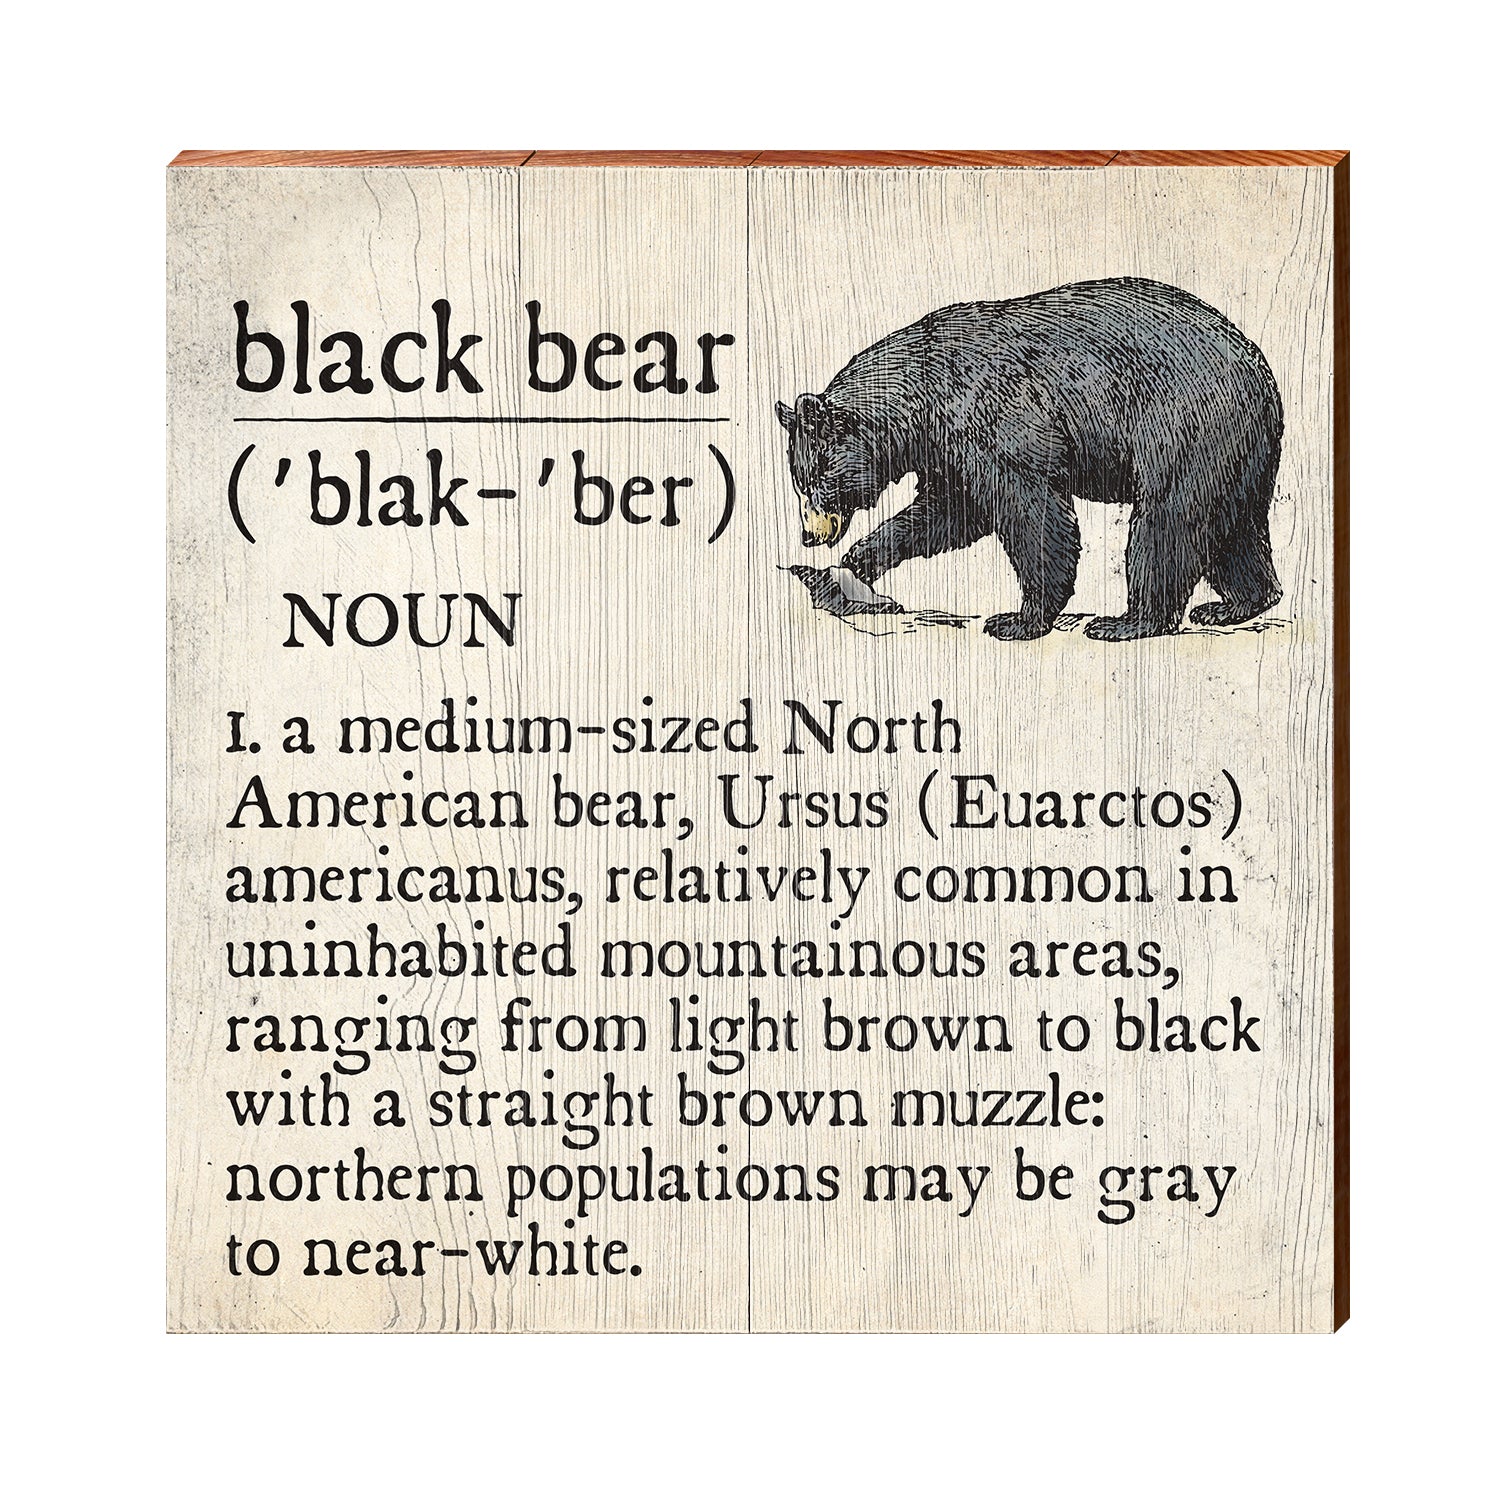 Definition of a bear